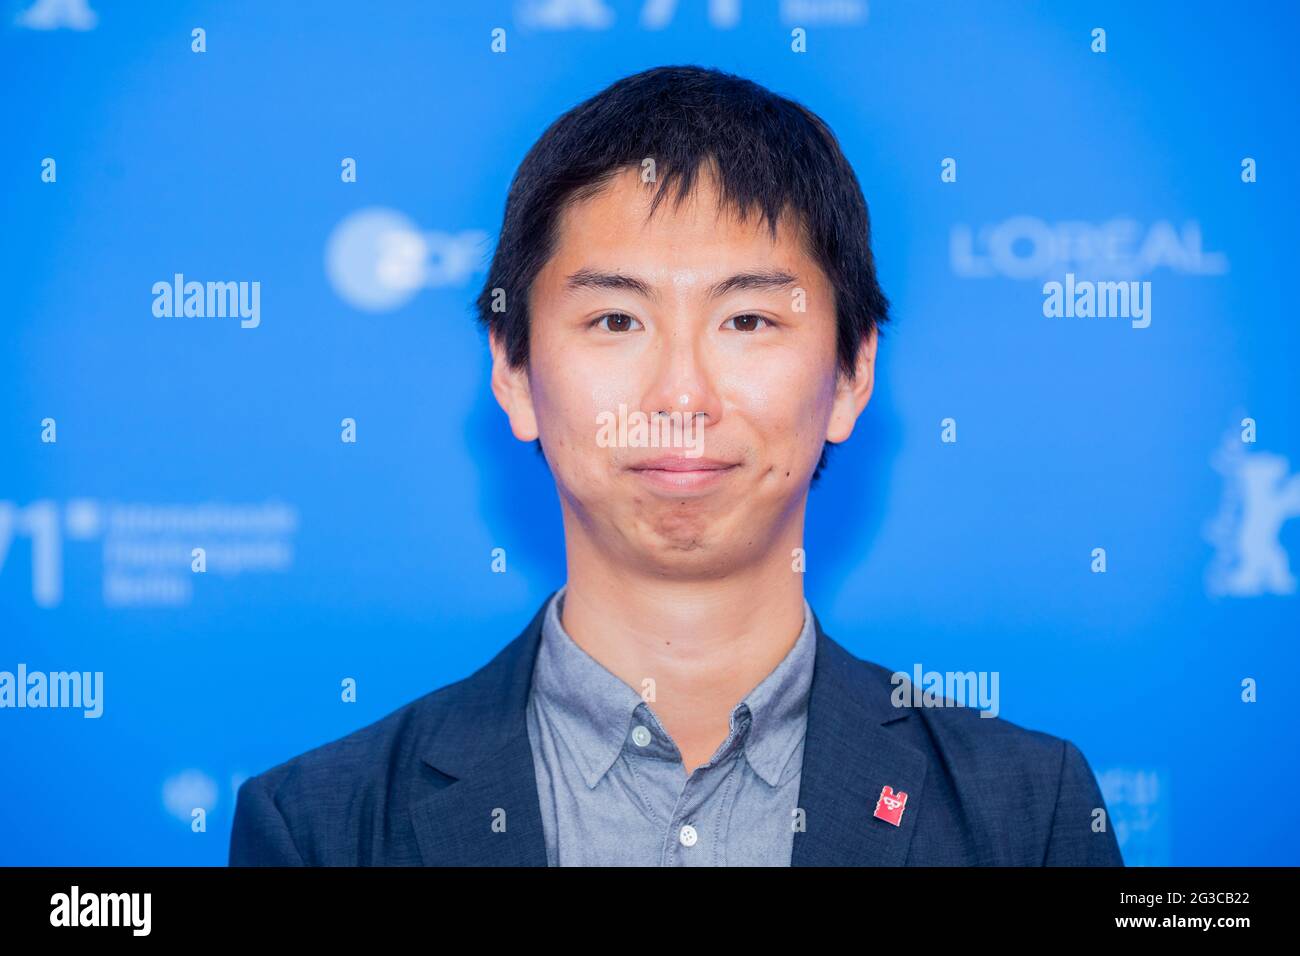 Berlin, Germany. 15th June, 2021. Toru Takano, assistant director, comes to the film premiere of the movie "Guzen to sozo" (Wheel of Fortune and Fantasy) at the open-air cinema on Museum Island. Credit: Christoph Soeder/dpa-Pool/dpa/Alamy Live News Stock Photo